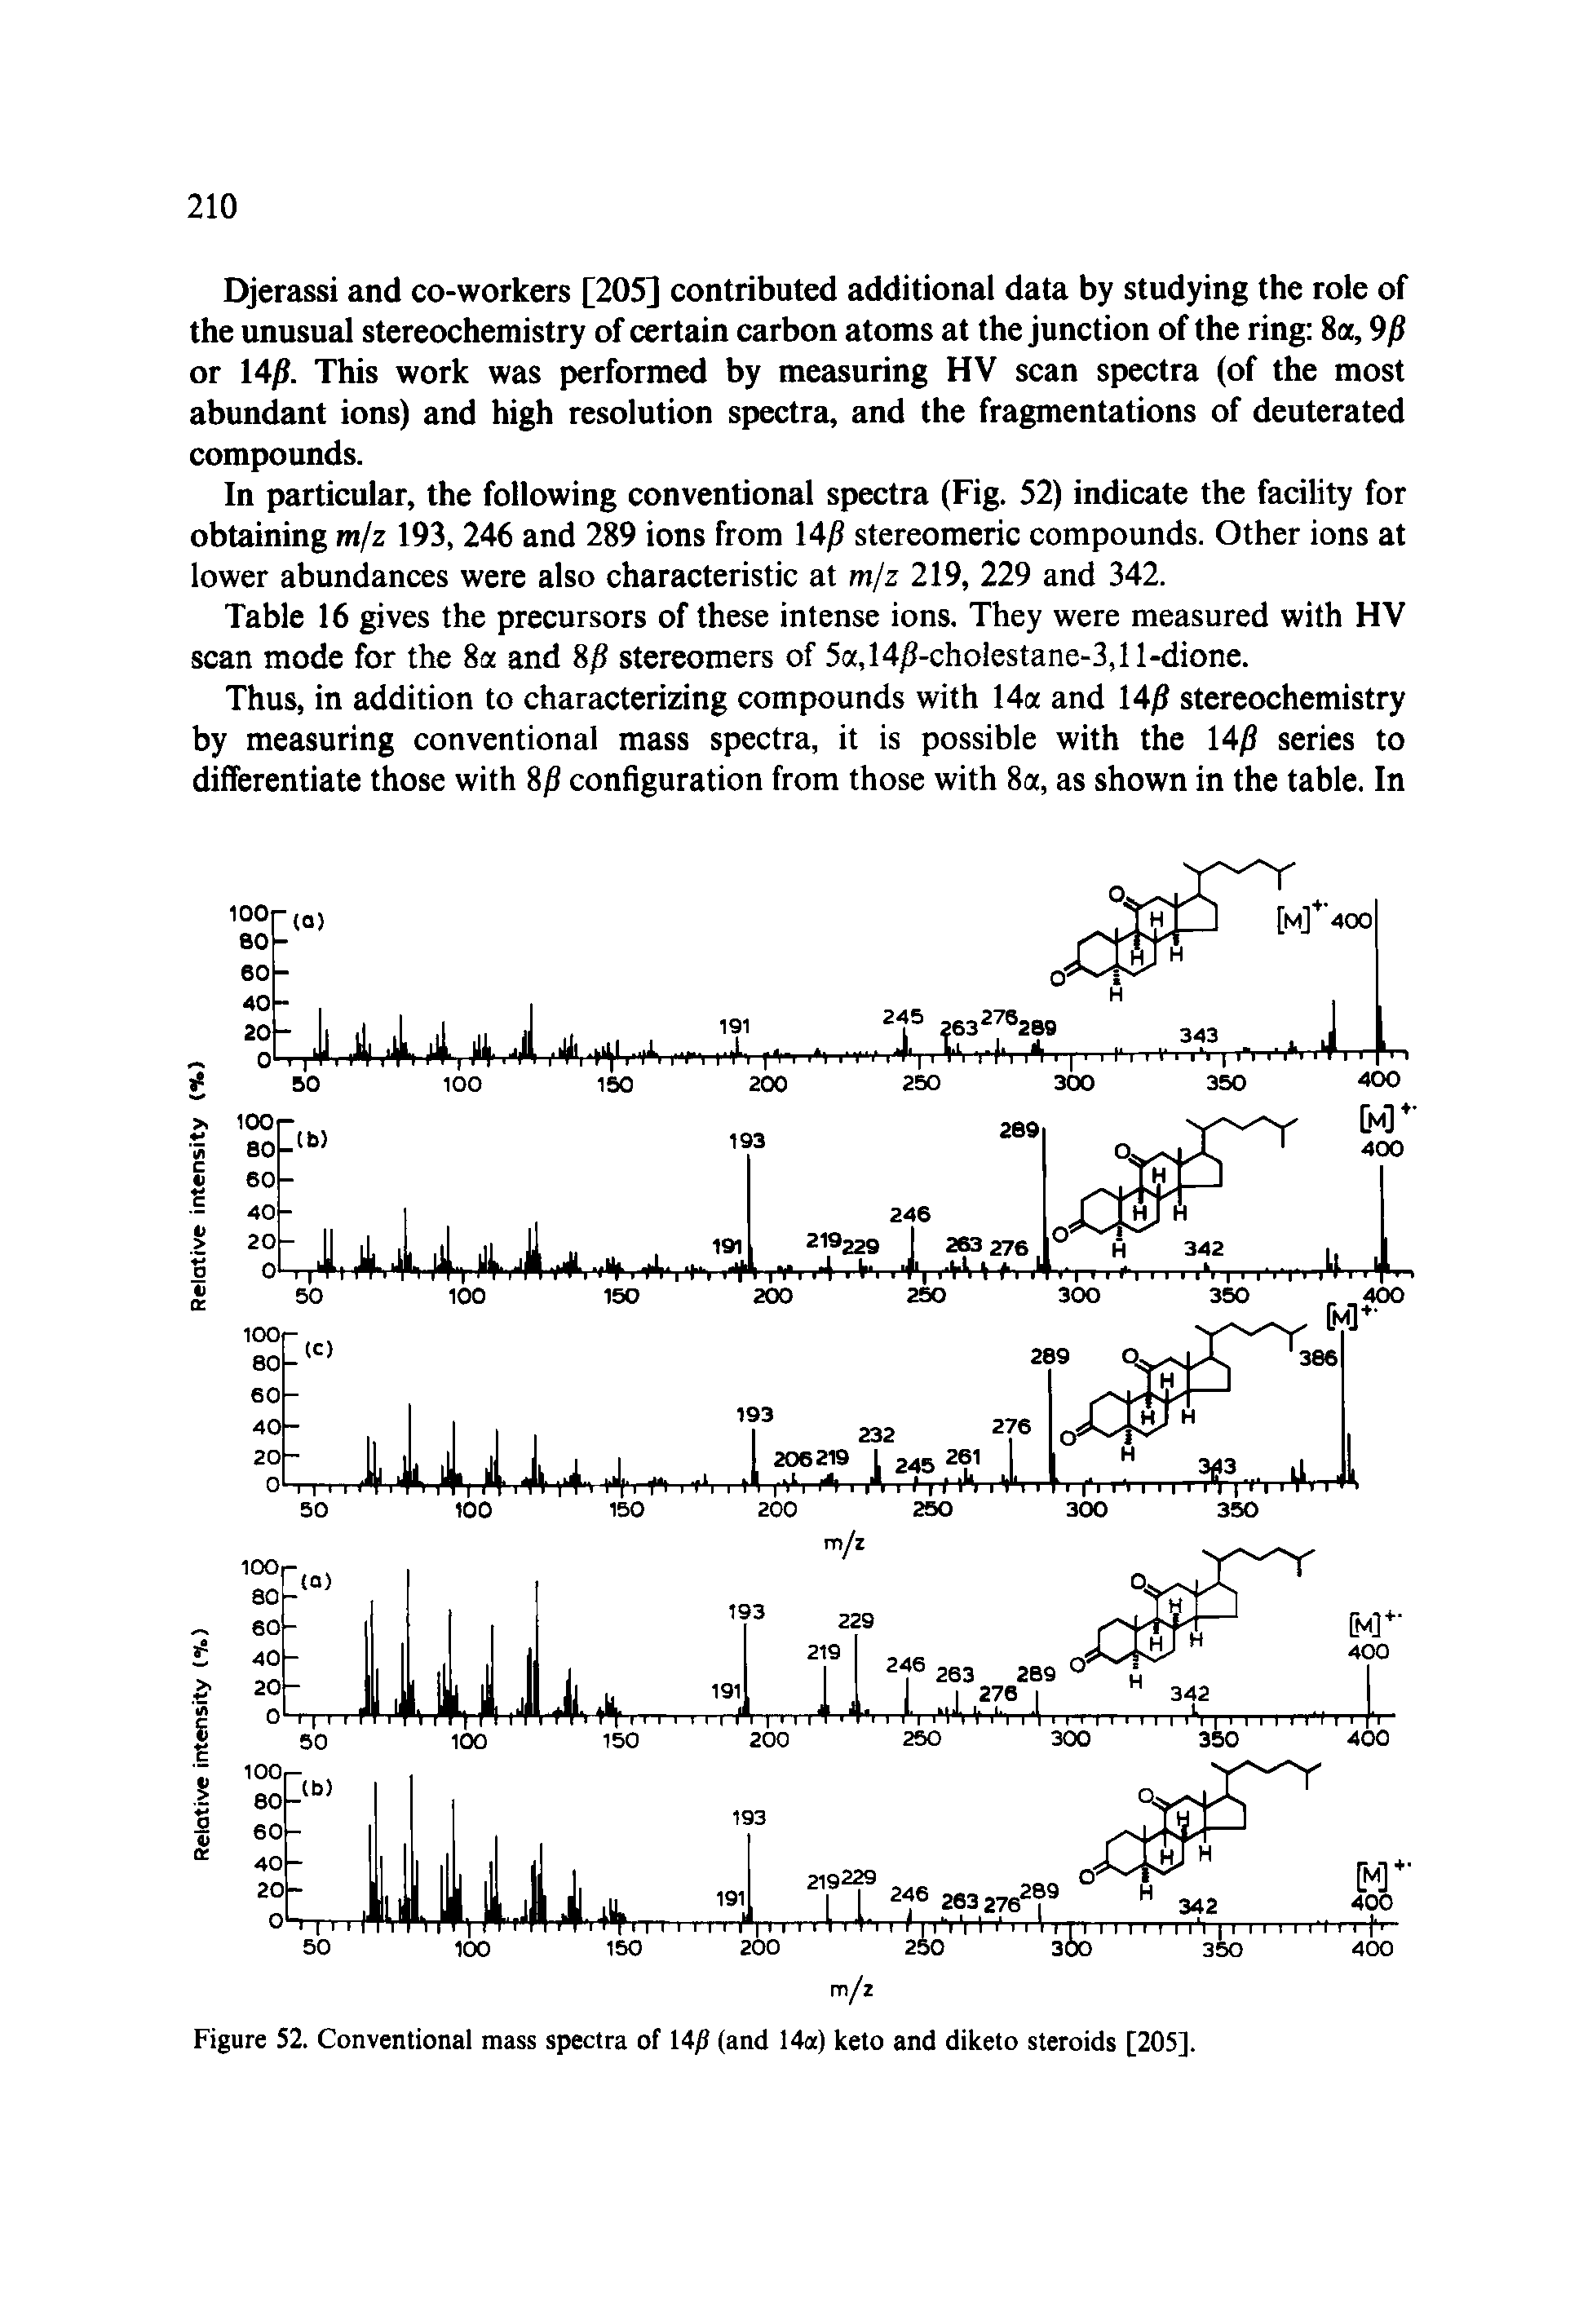 Figure 52. Conventional mass spectra of 14 (and 14a) keto and diketo steroids [205].